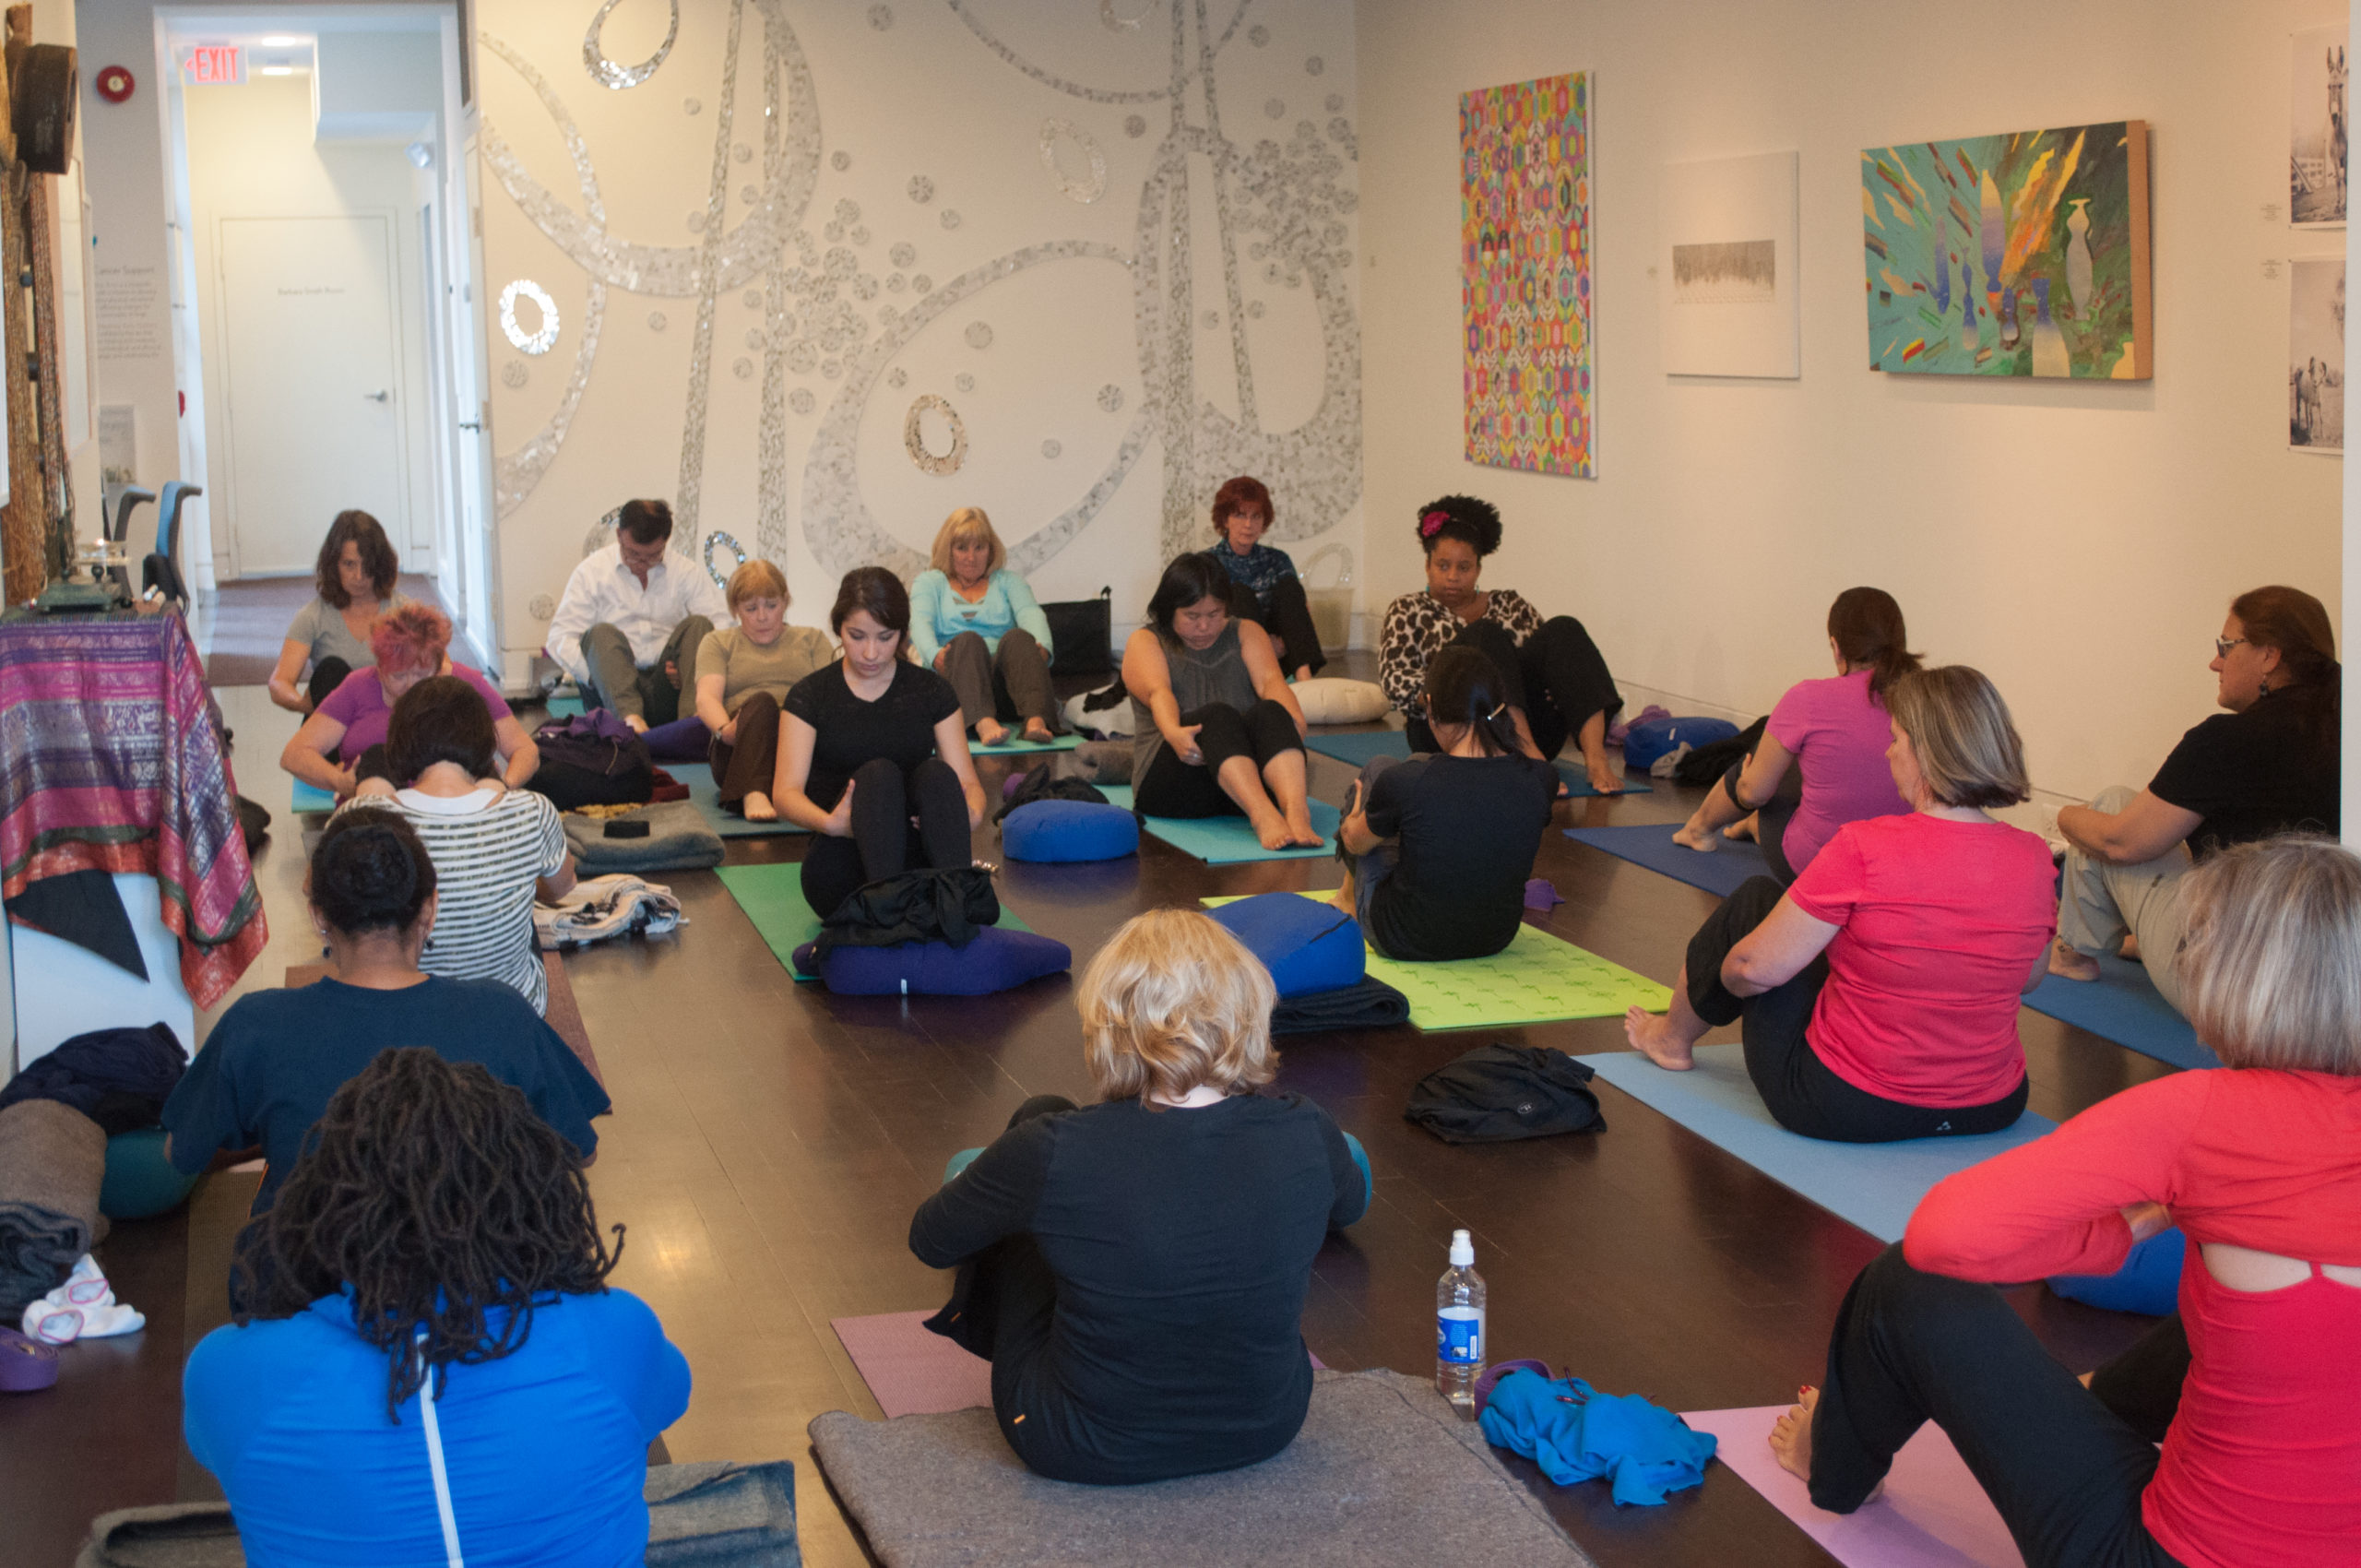 Gentle Yoga in the Gallery